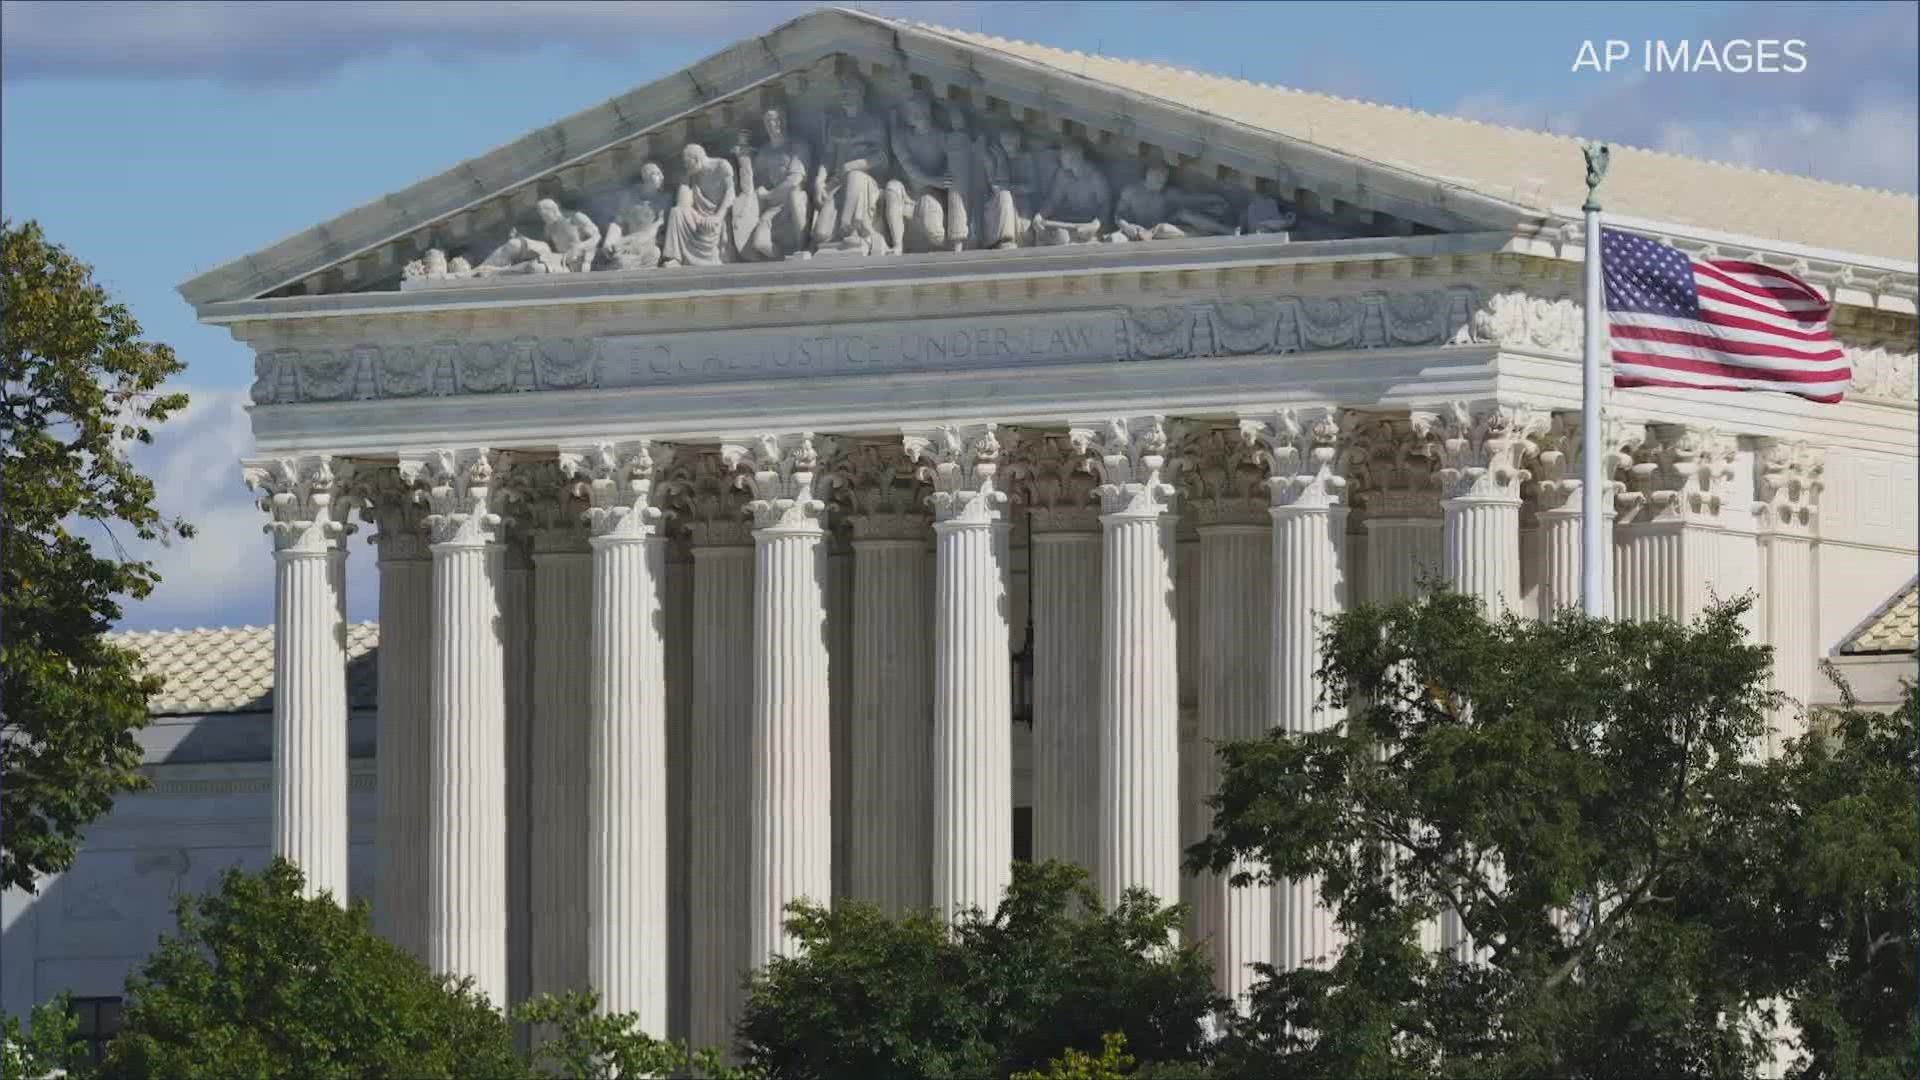 The U.S. Supreme Court's decision came Friday after it heard arguments in early November.